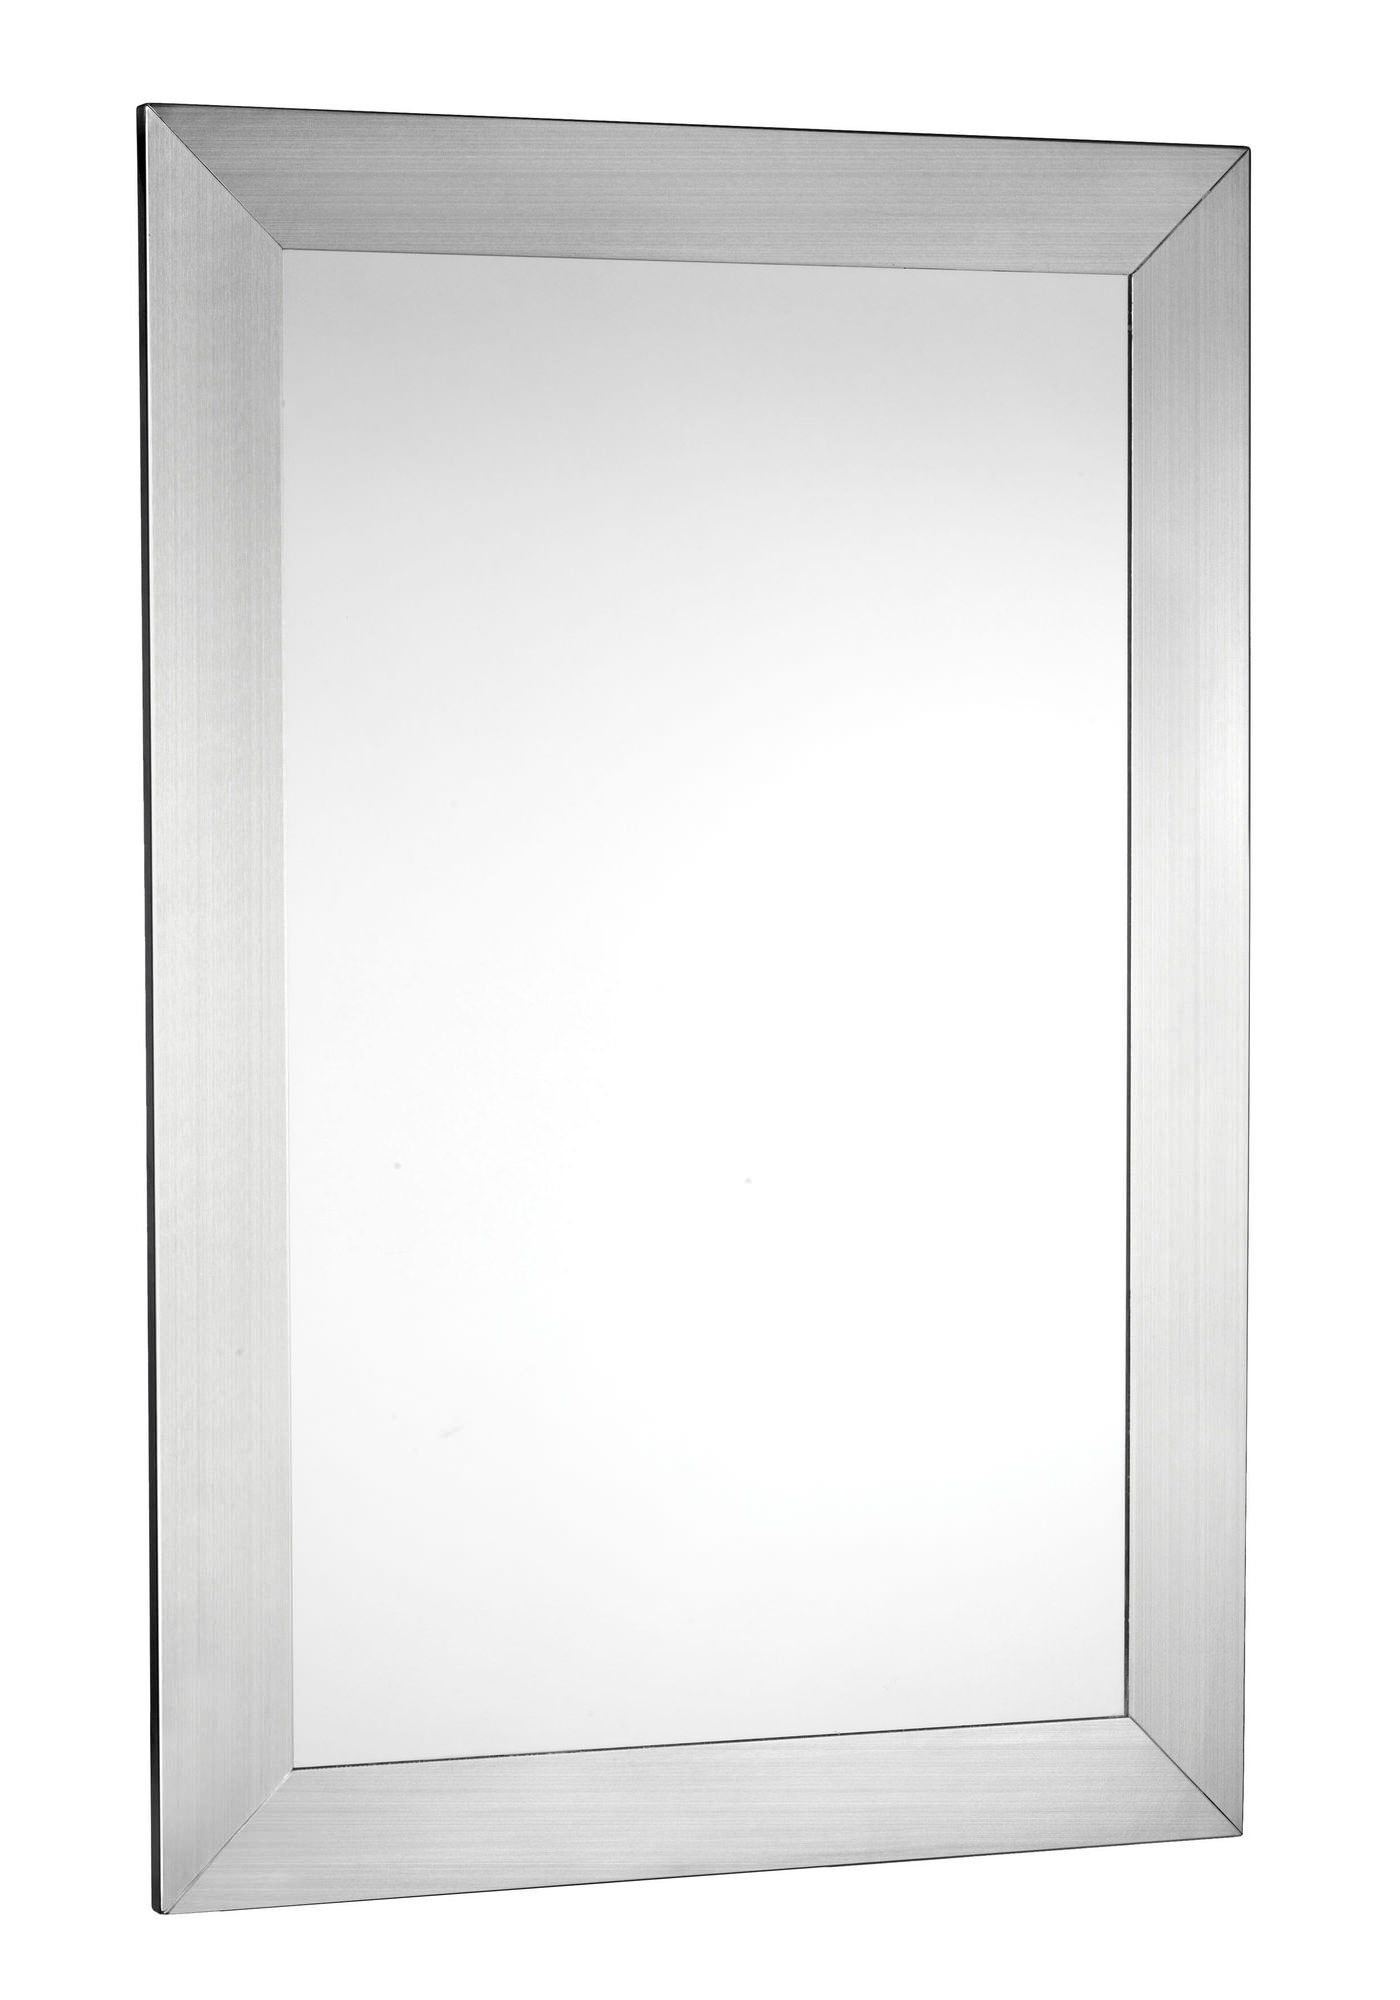 Croydex Parkgate Mirror With Brushed Stainless Steel Frame | Mm701605 Regarding Drake Brushed Steel Wall Mirrors (View 6 of 15)